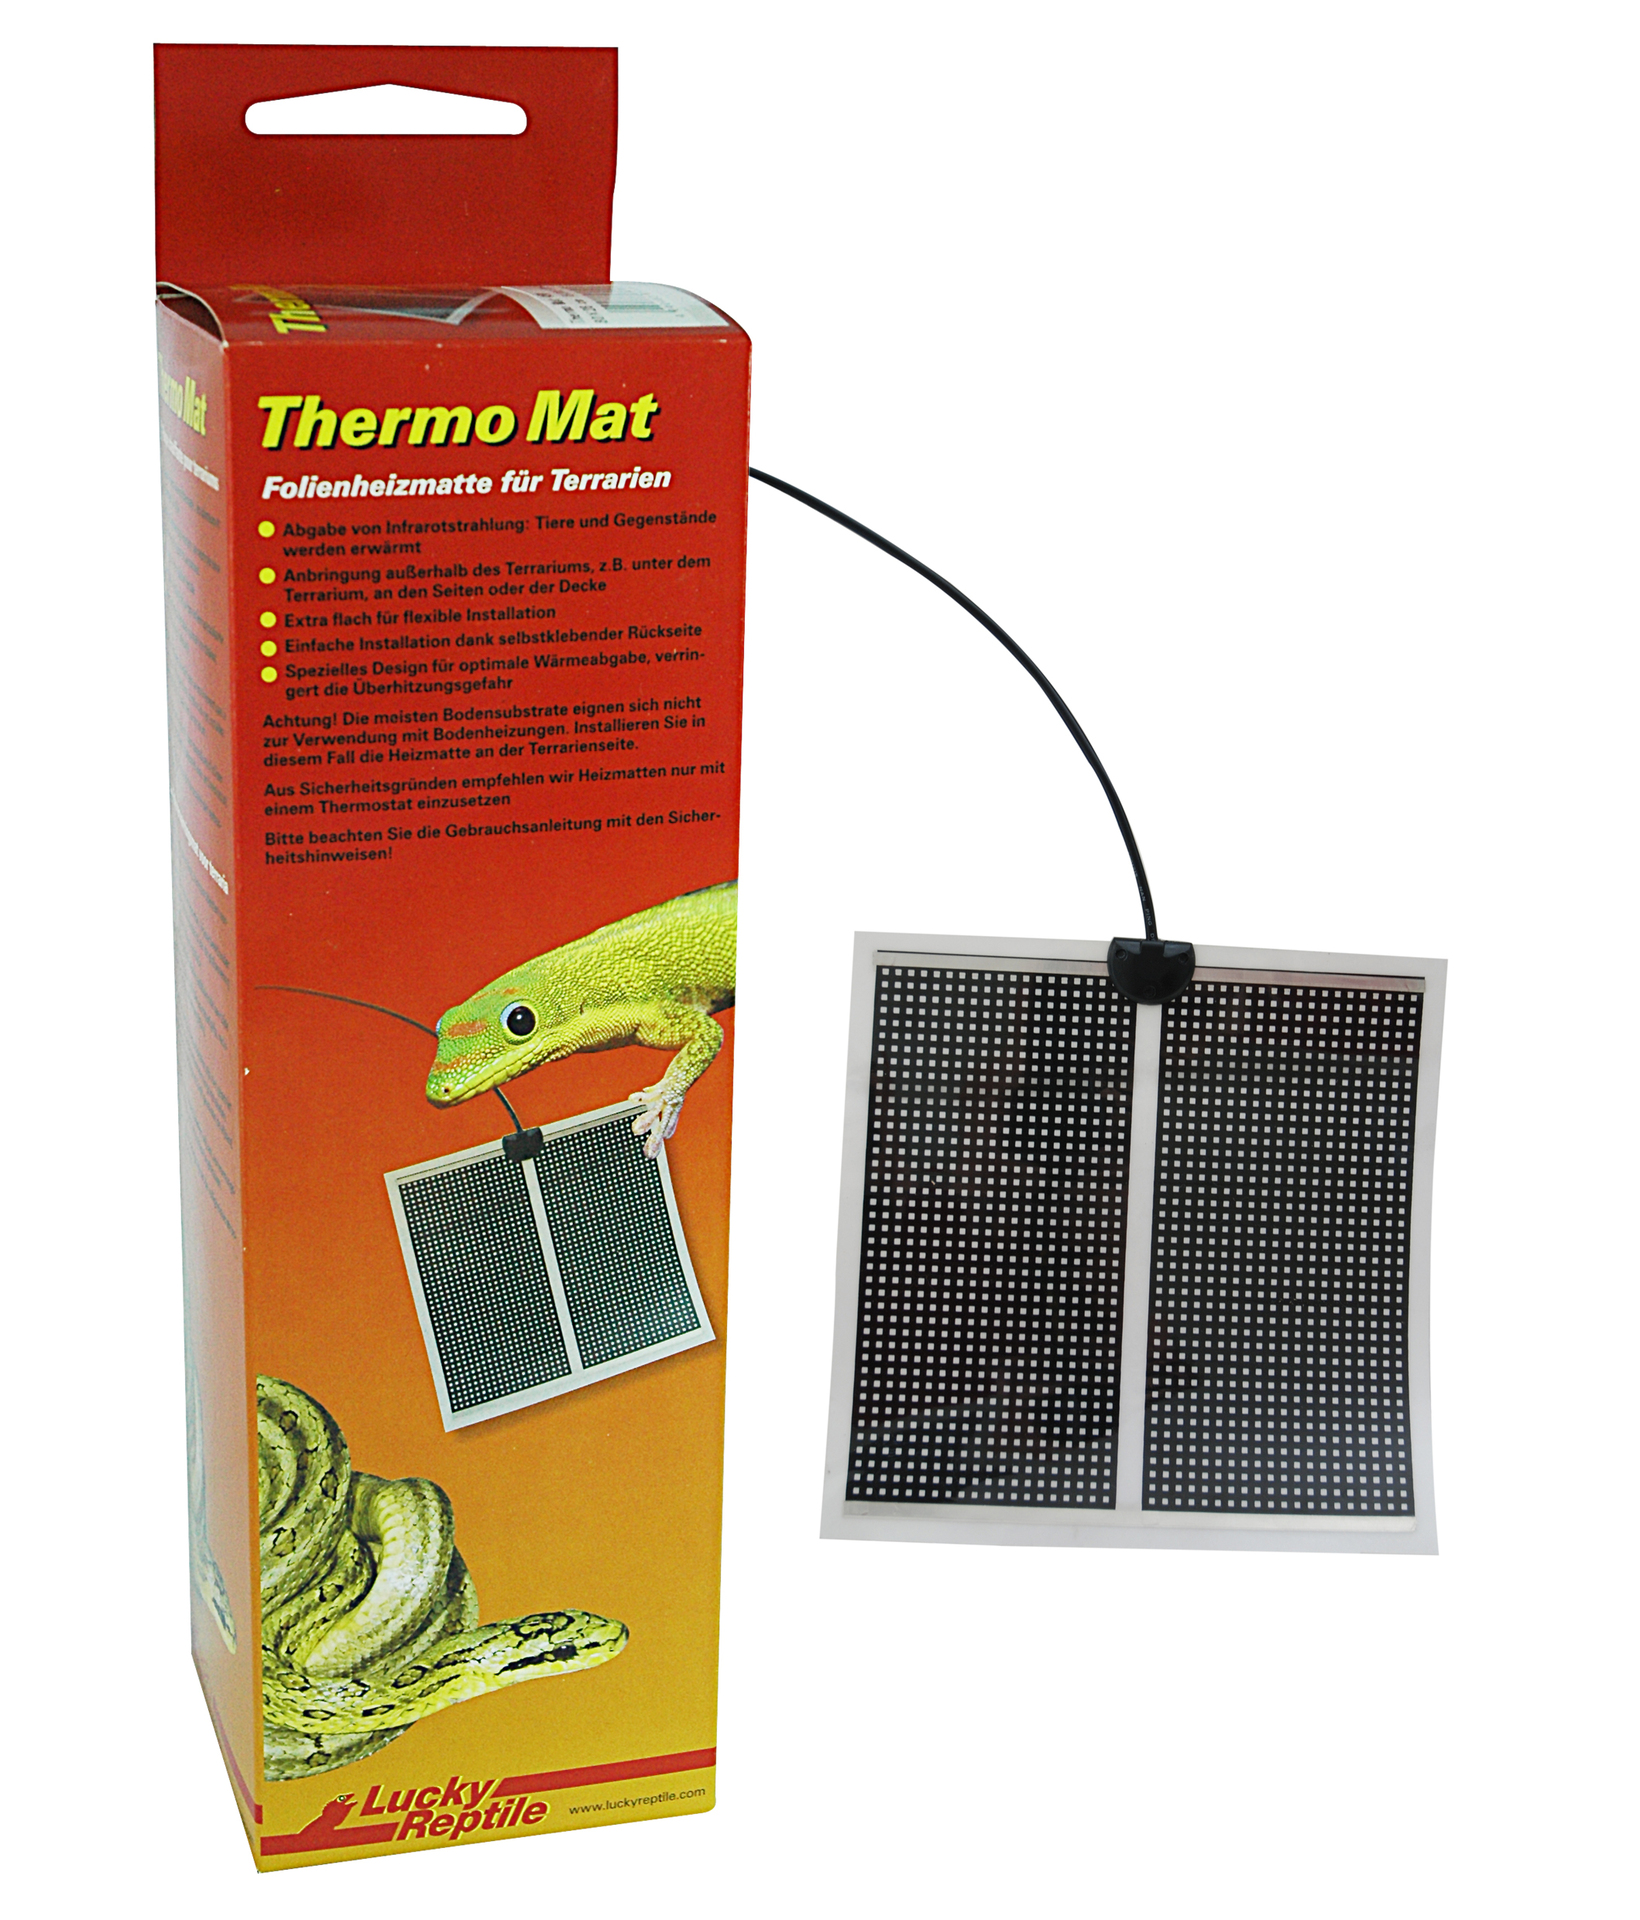 Thermo Mat